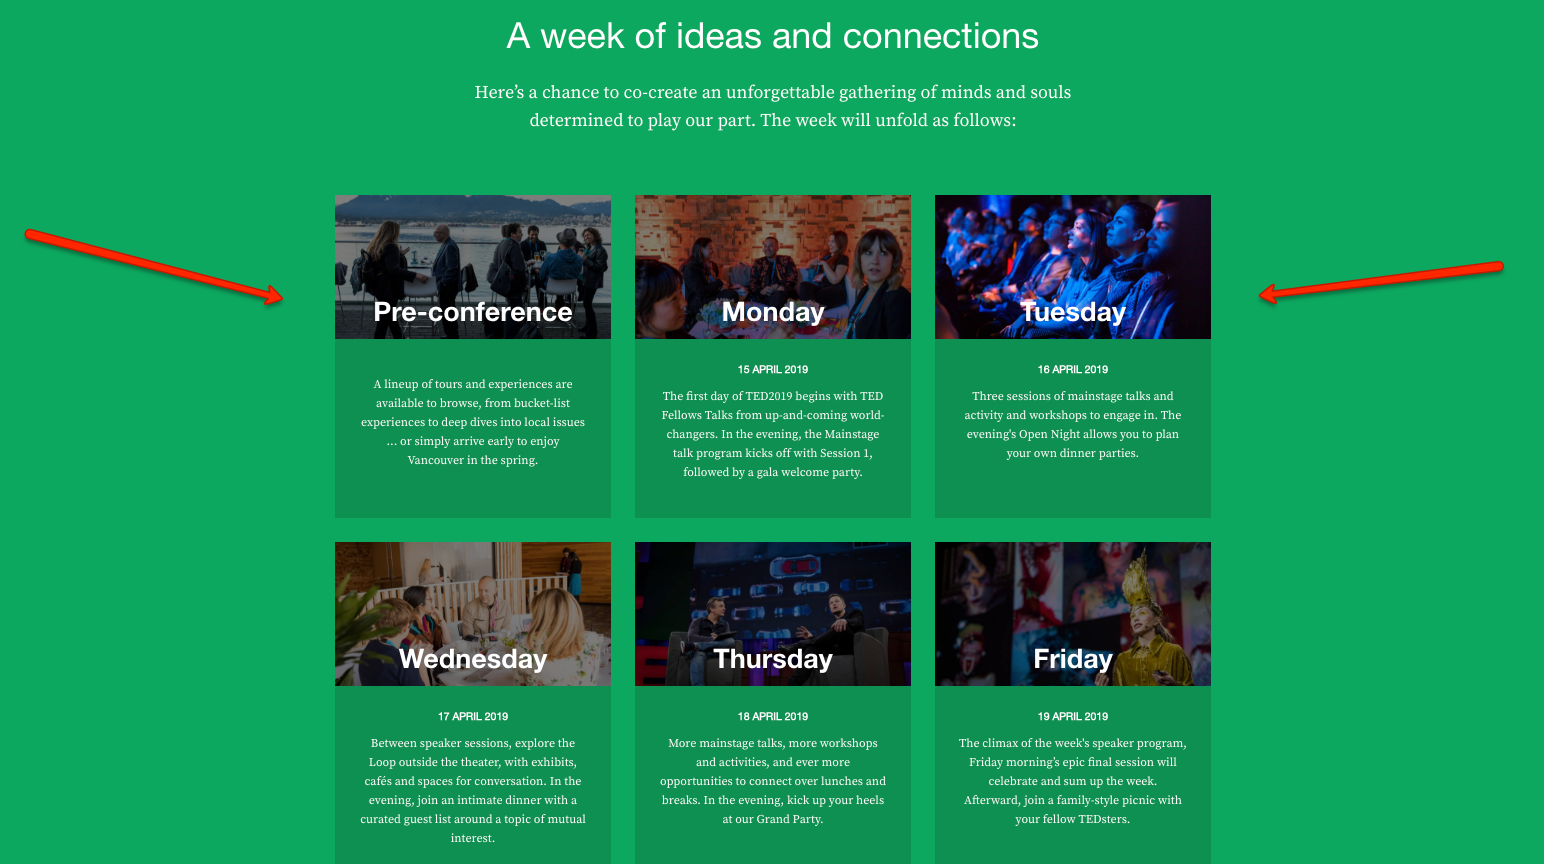 Screenshot of TED conference online programme showing a basic outline of conference events